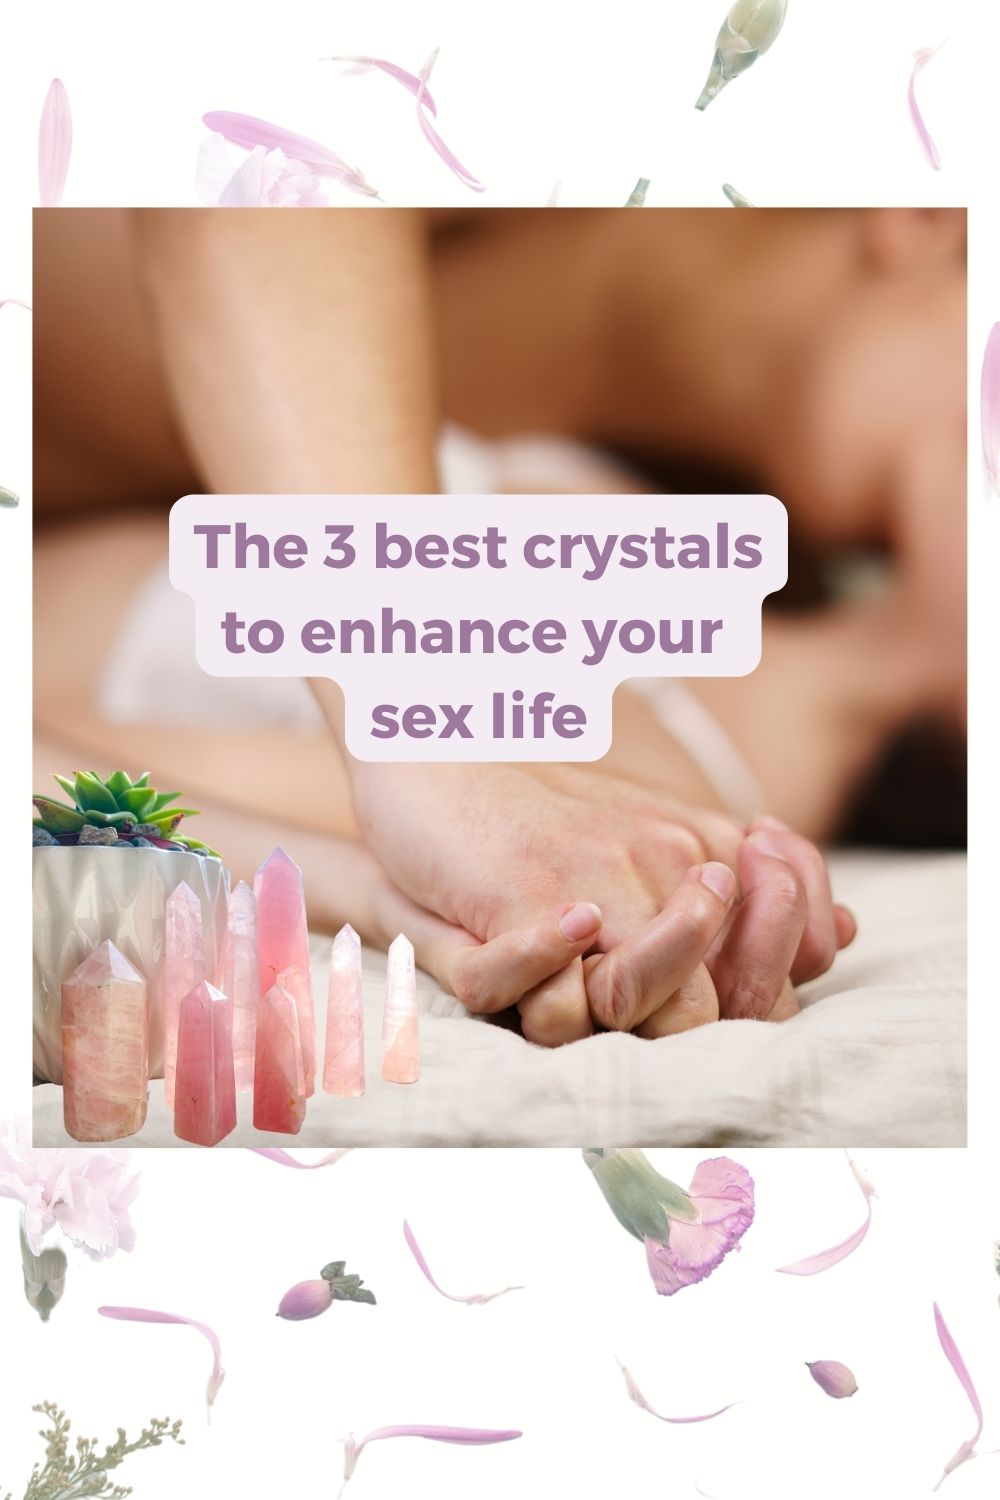 3 best crystals to enhance your sex life. Rose Quartz, Larimar,and Ghost Amethyst. crystals and gemstone jewelry made from these crystals to take into the bedroom.